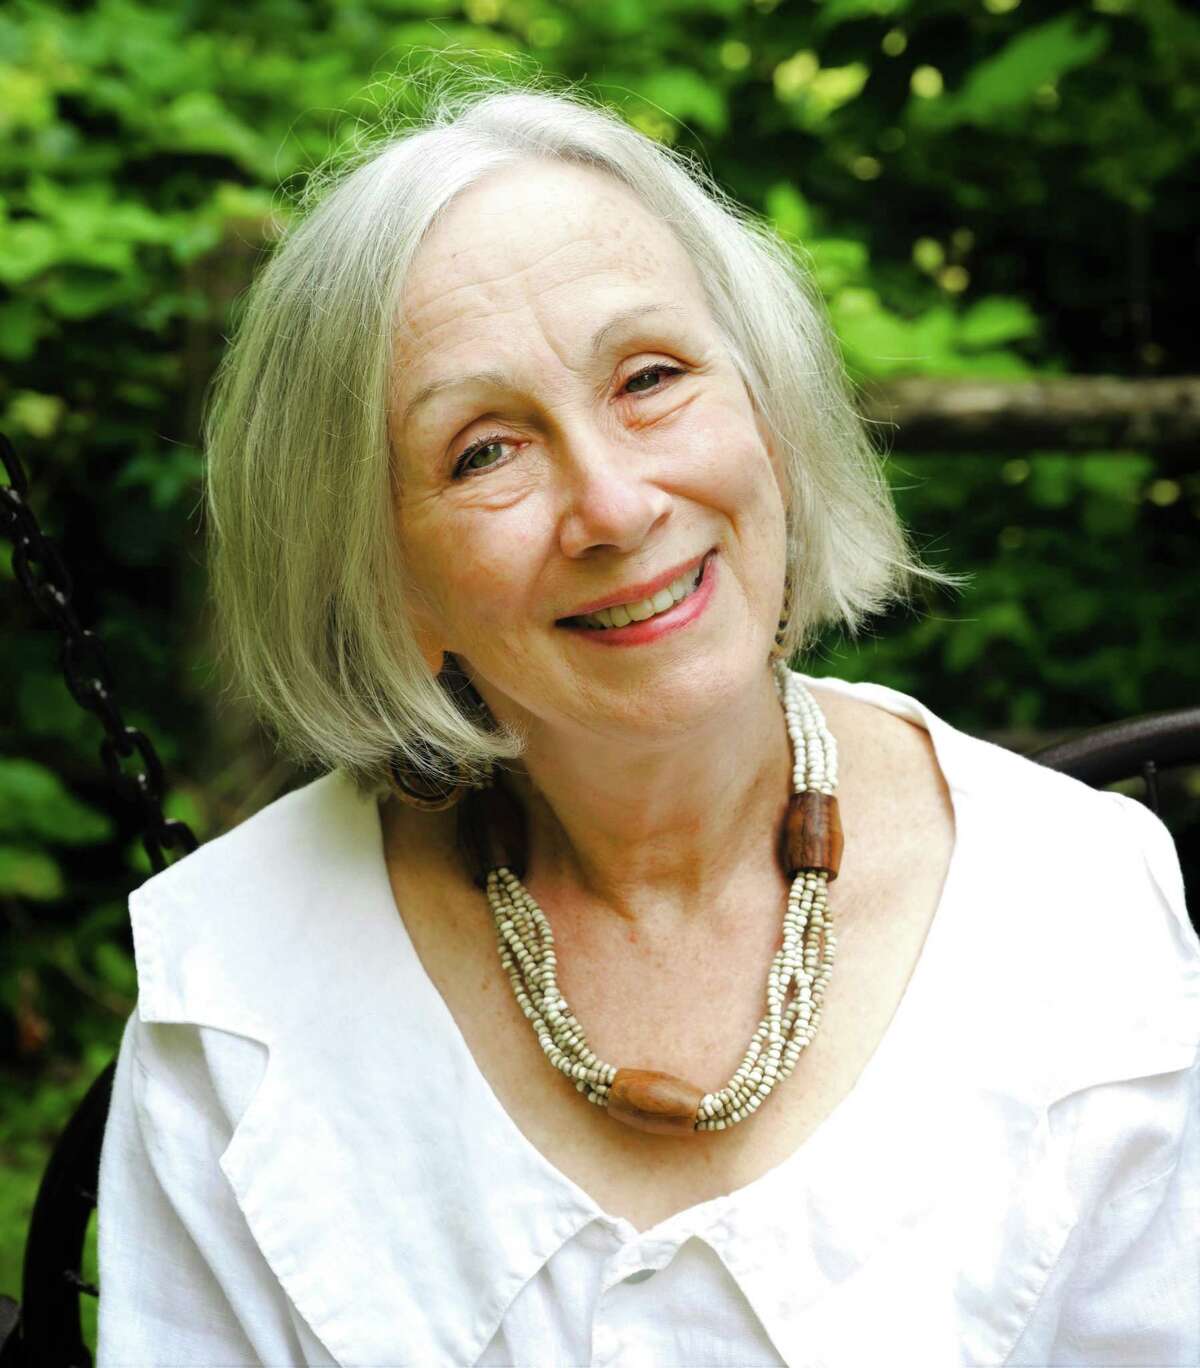 Ridgefield poet laureate Barb Jennes, (pictured), is going to present a program titled “Baldwin and Beyond: Black Poets in Their Own Voices,” Dec. 3, 2020, ay 7 p.m. via the Zoom application. The event is part of the many upcoming happenings around the town.